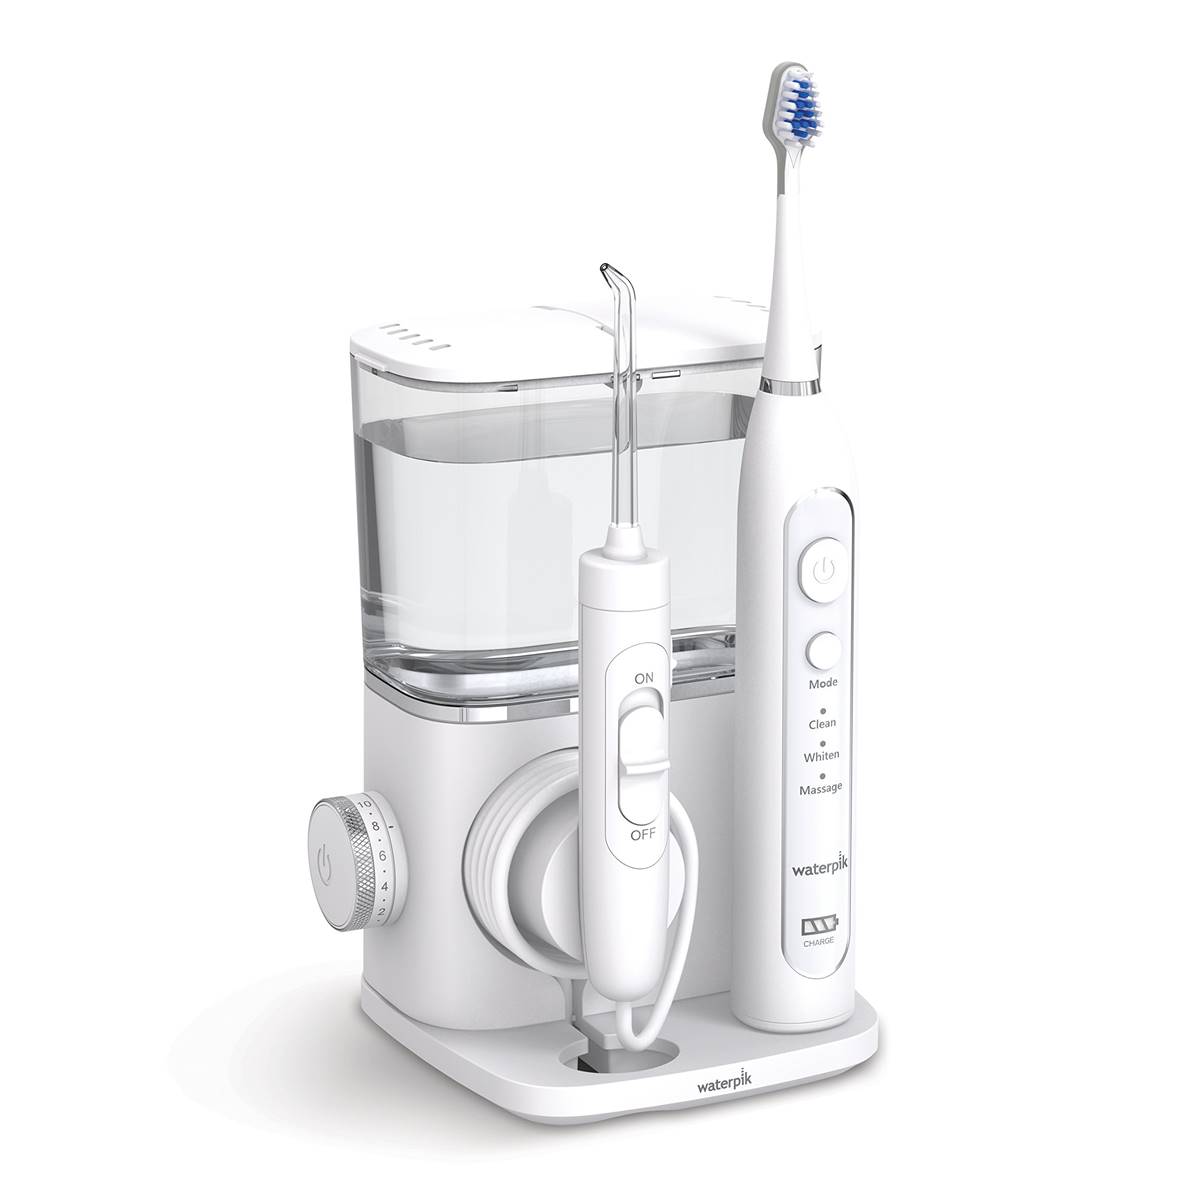 What Is The Best Electric Toothbrush With A Waterpik